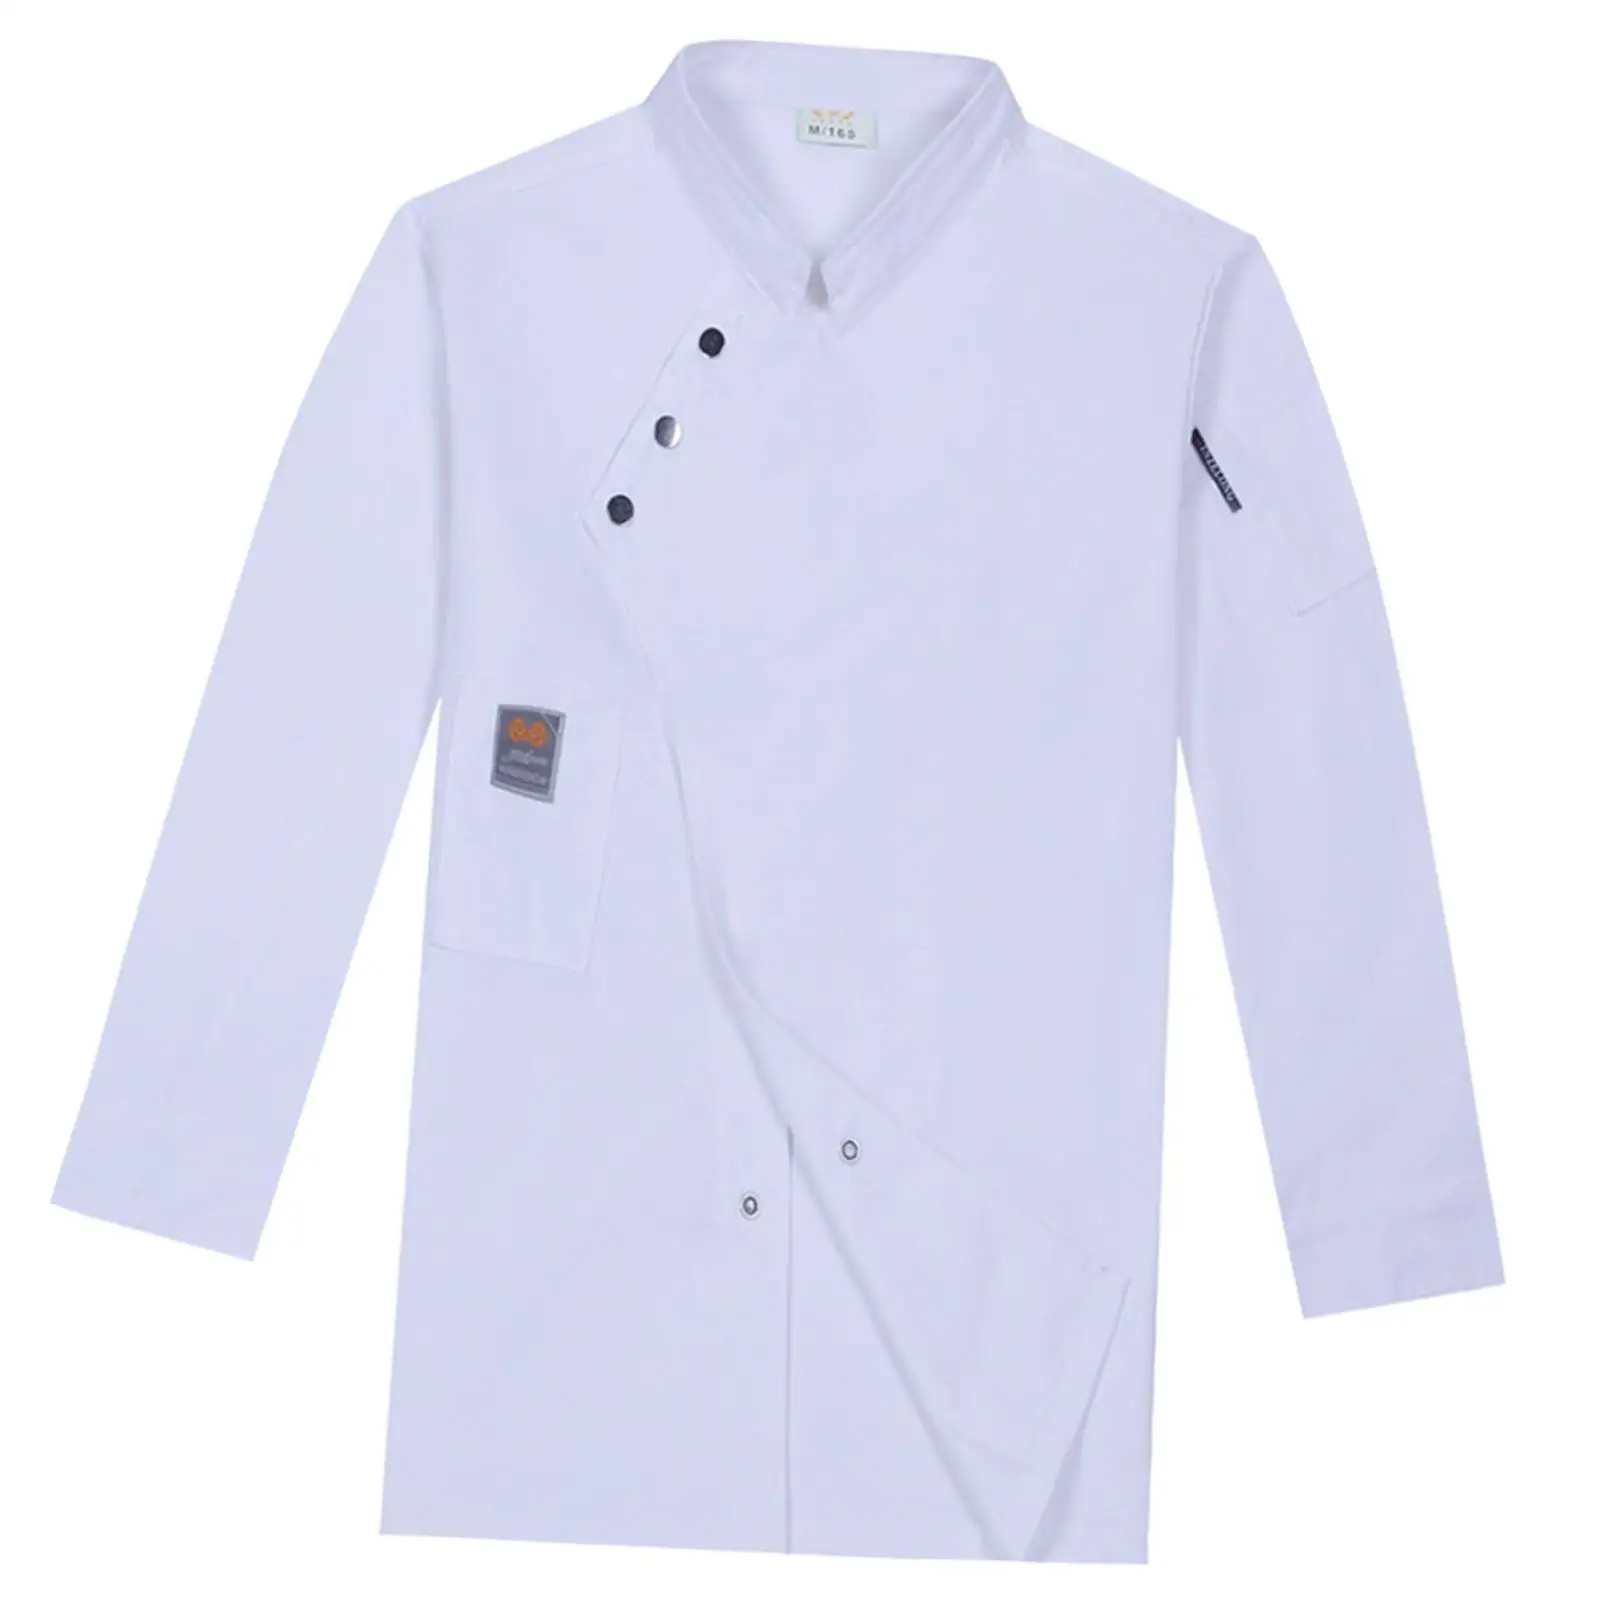 Chef Coat Long Sleeve Breathable with Pocket Lightweight Chef Clothing Button